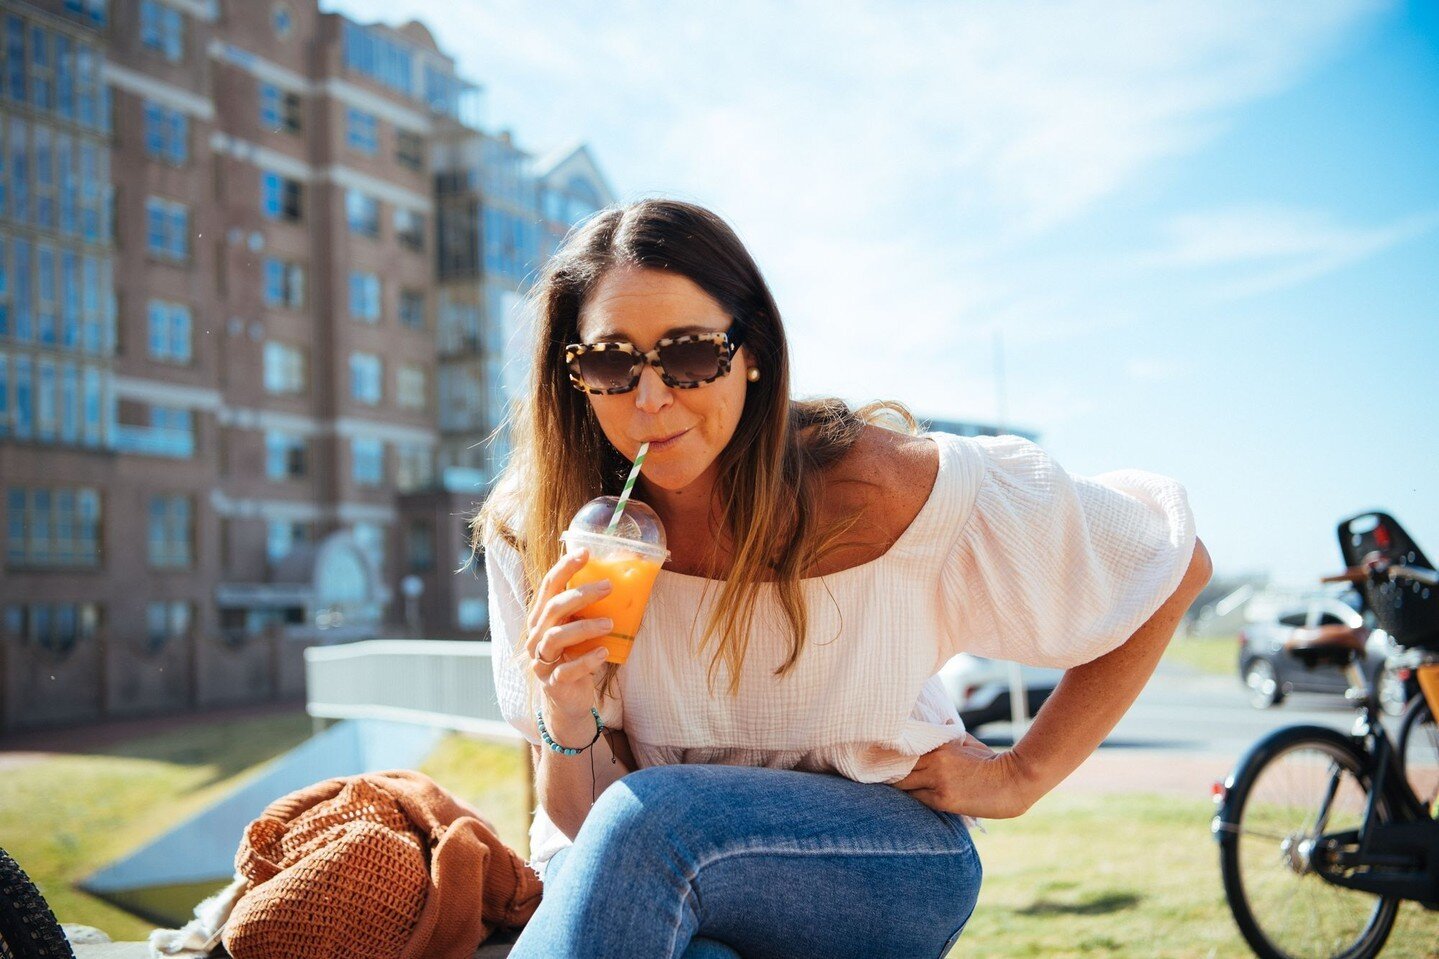 Have you tried our cold press juice?? Just so you know how far we go to get the absolute best, most beautiful local food in front of you - we source our juice from Maggie @thehonestjuice - a real life Juice Therapist people! 

That's right, not only 